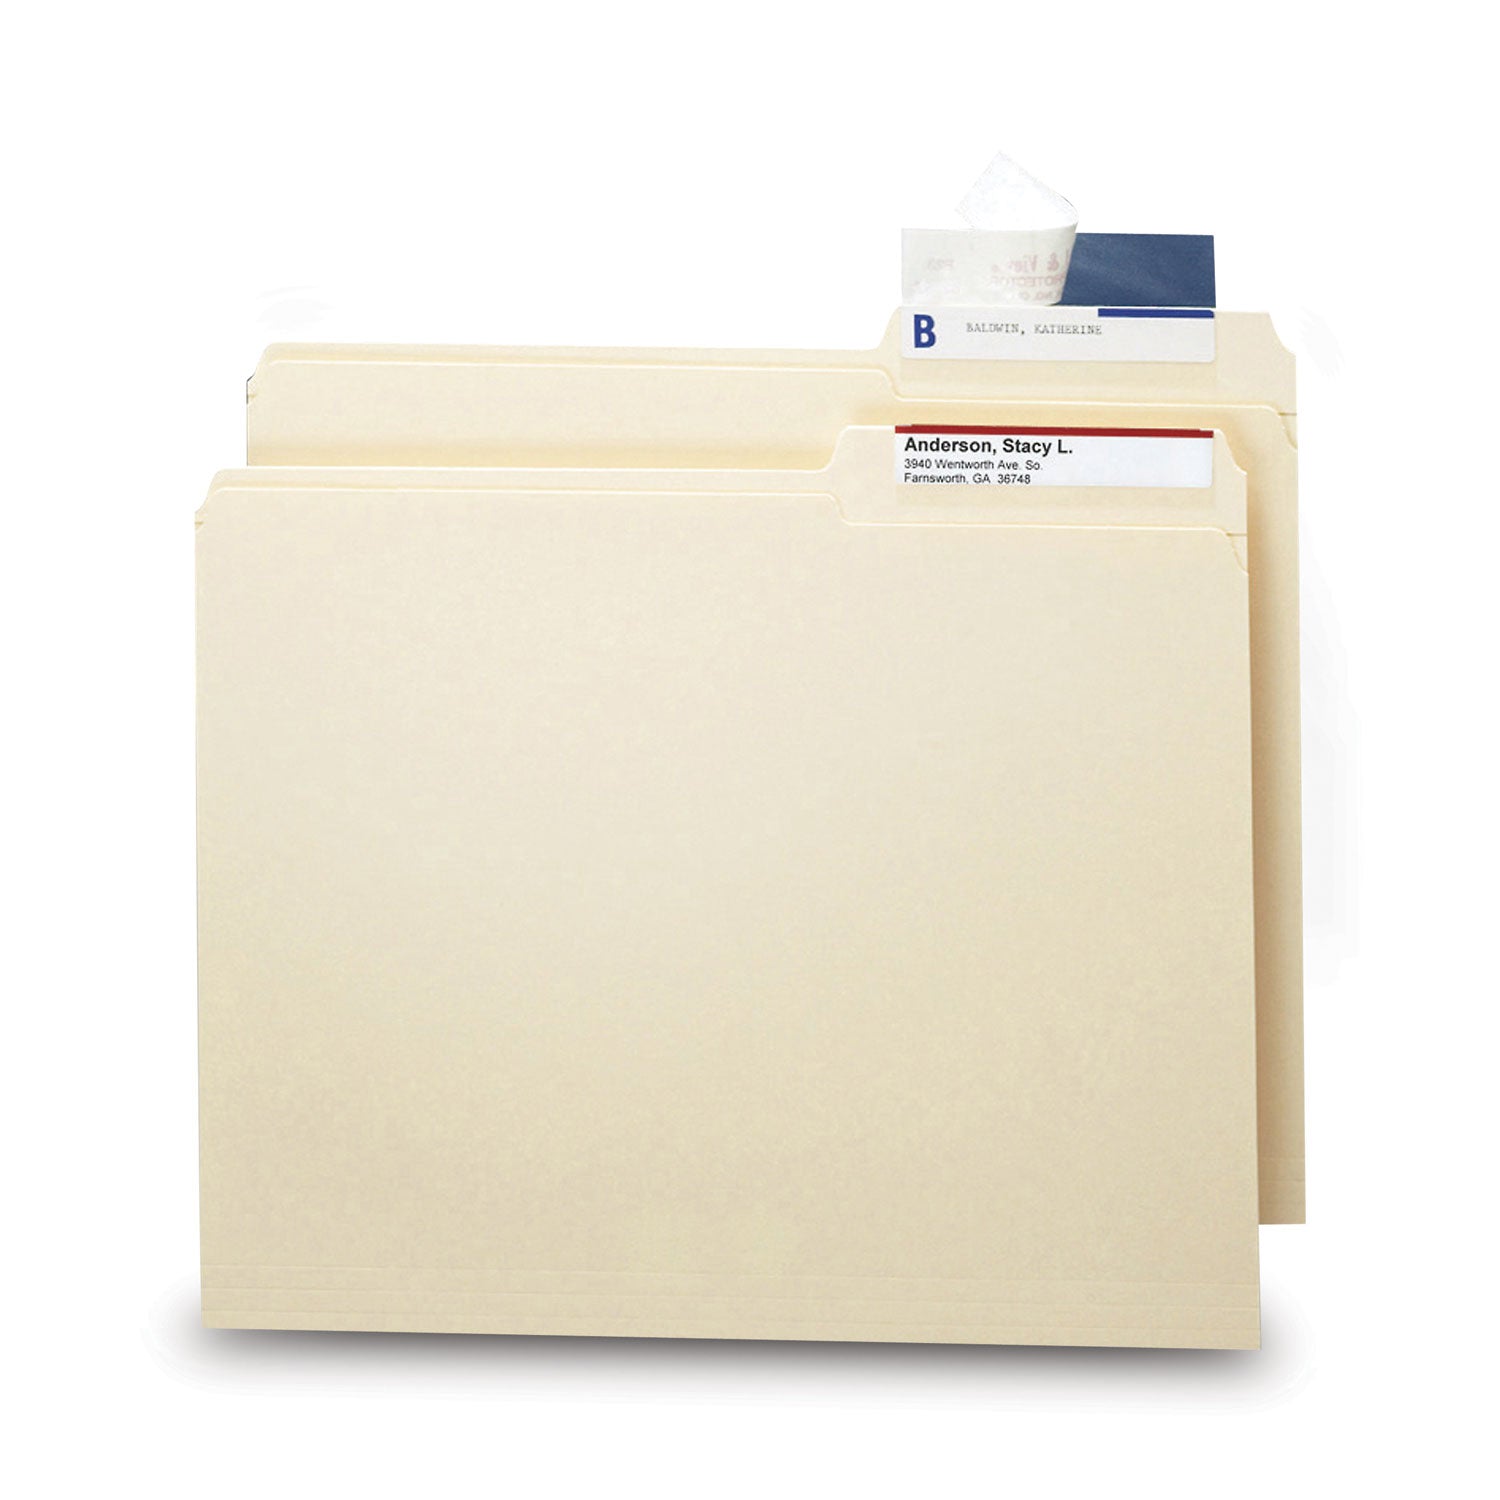 Seal and View File Folder Label Protector, Clear Laminate, 3.5 x 1.69, 100/Pack - 